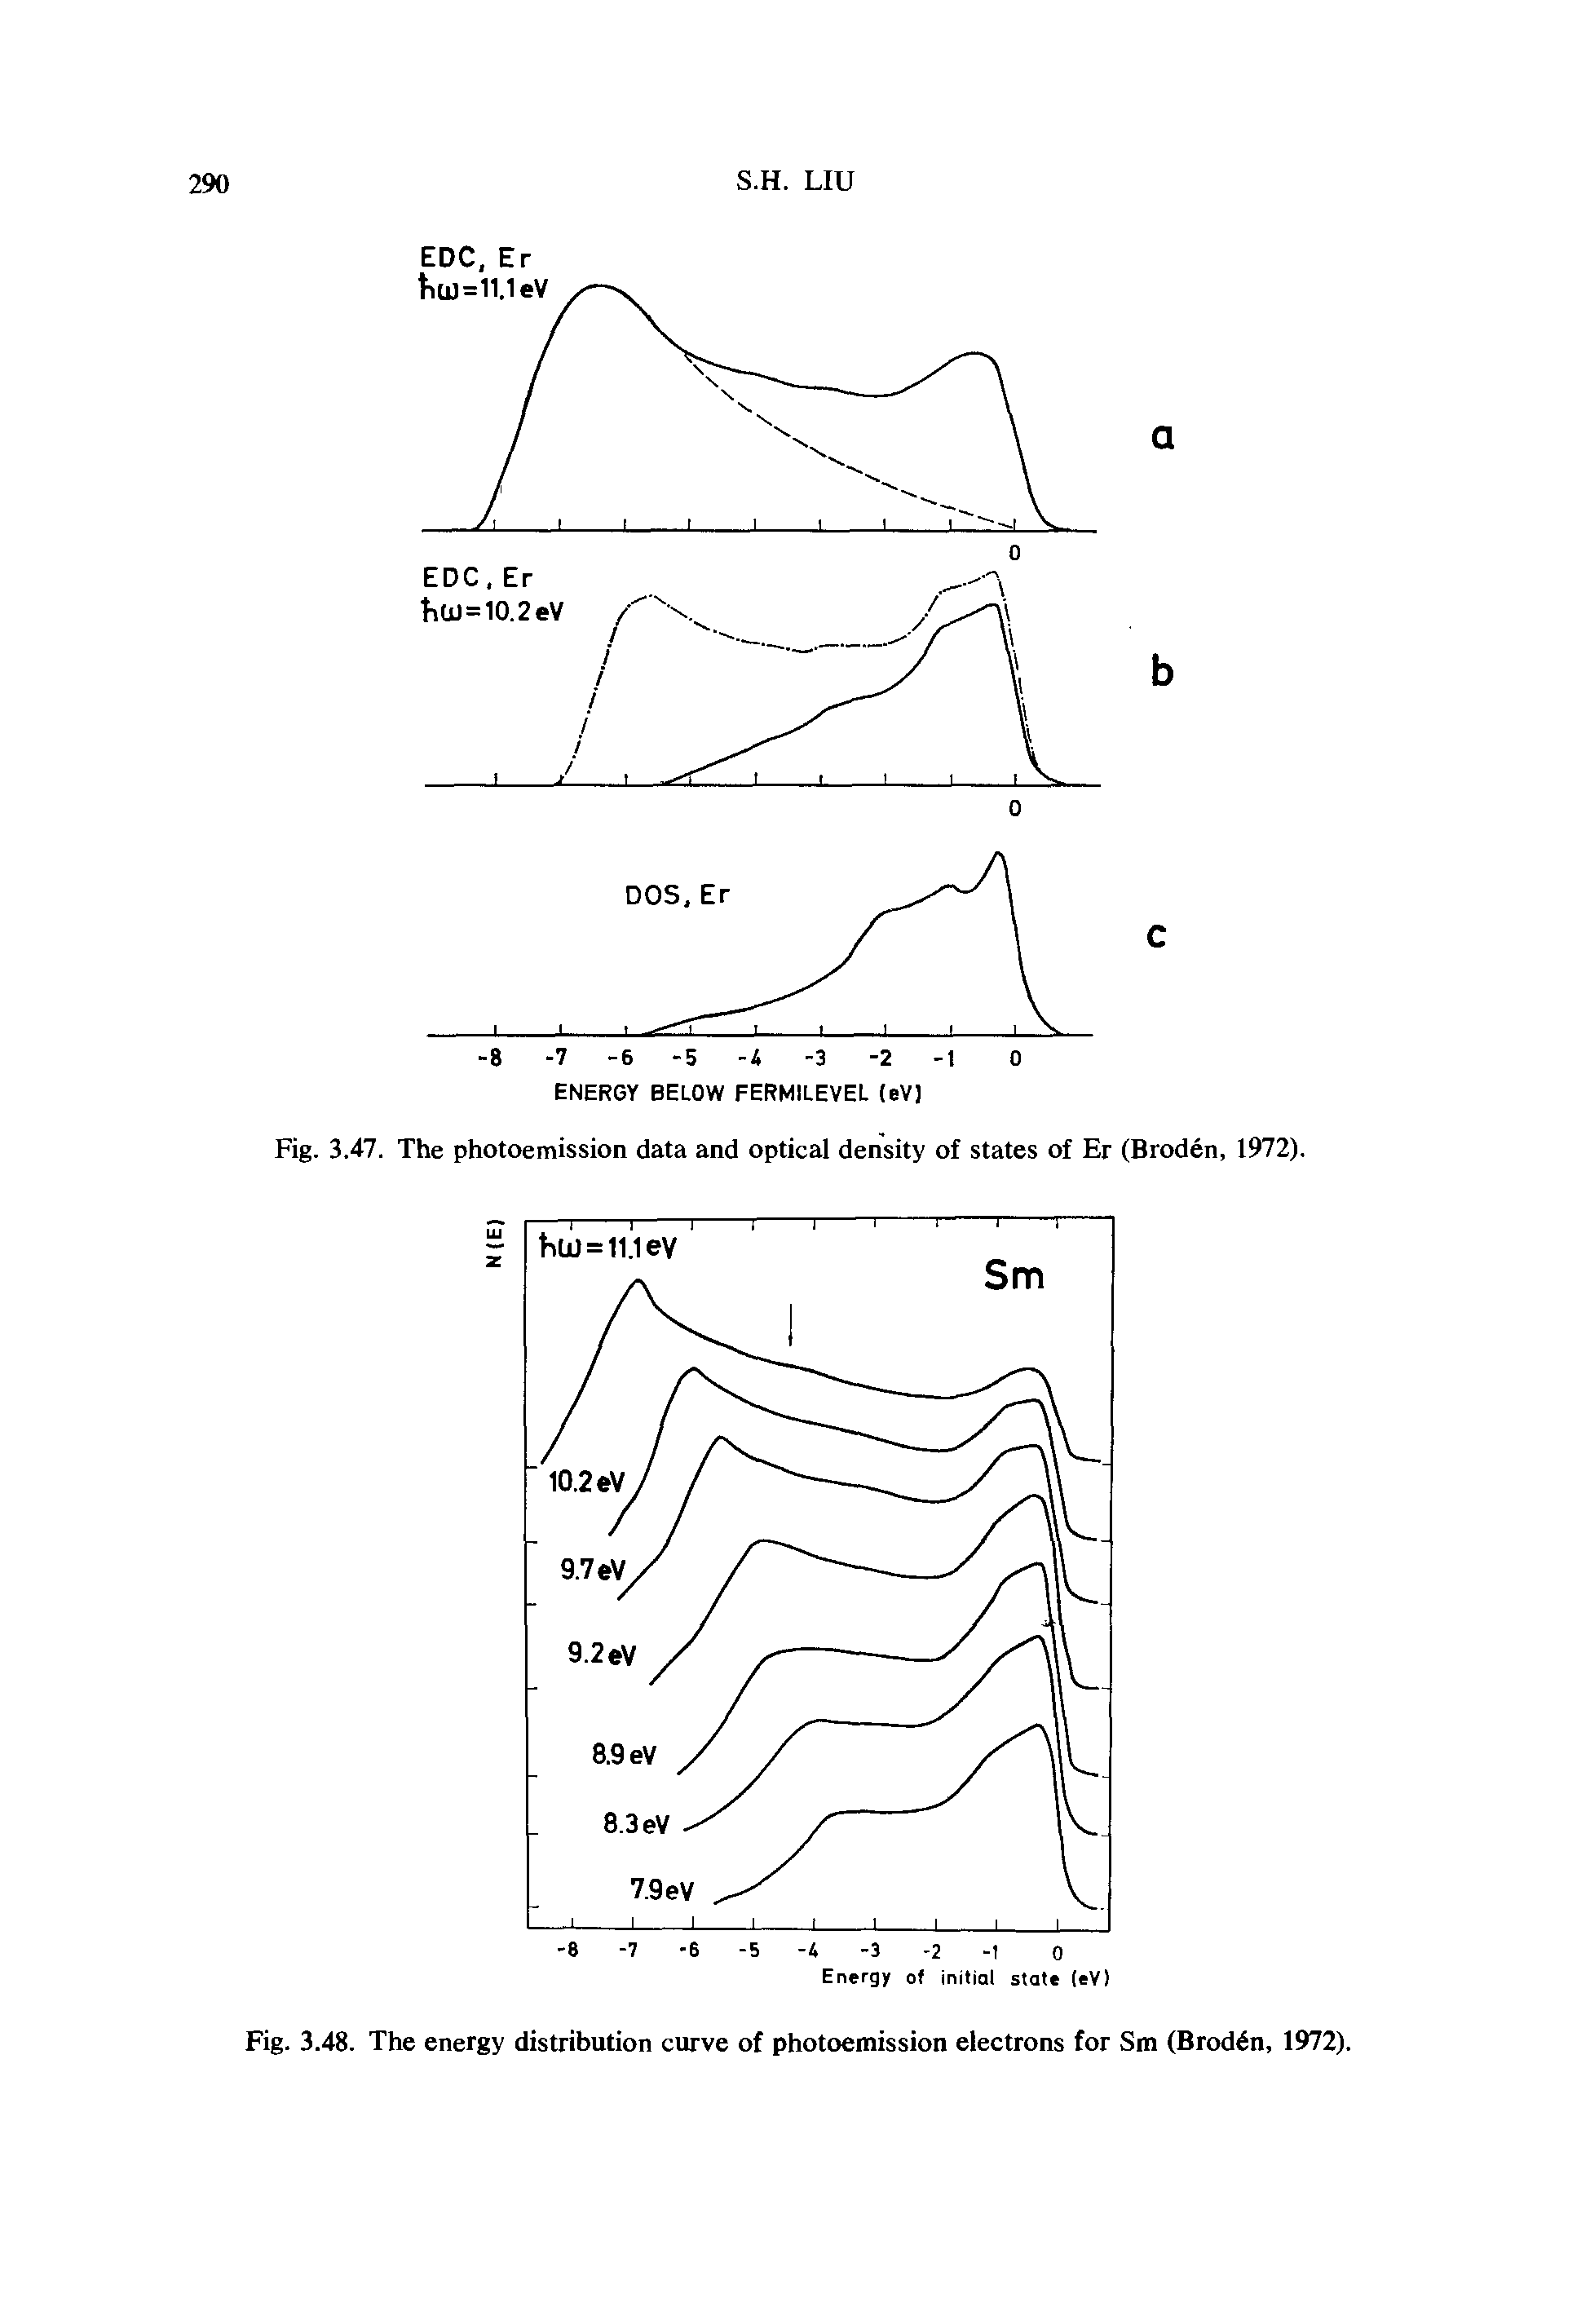 Fig. 3.47. The photoemission data and optical density of states of Er (Broden, 1972).